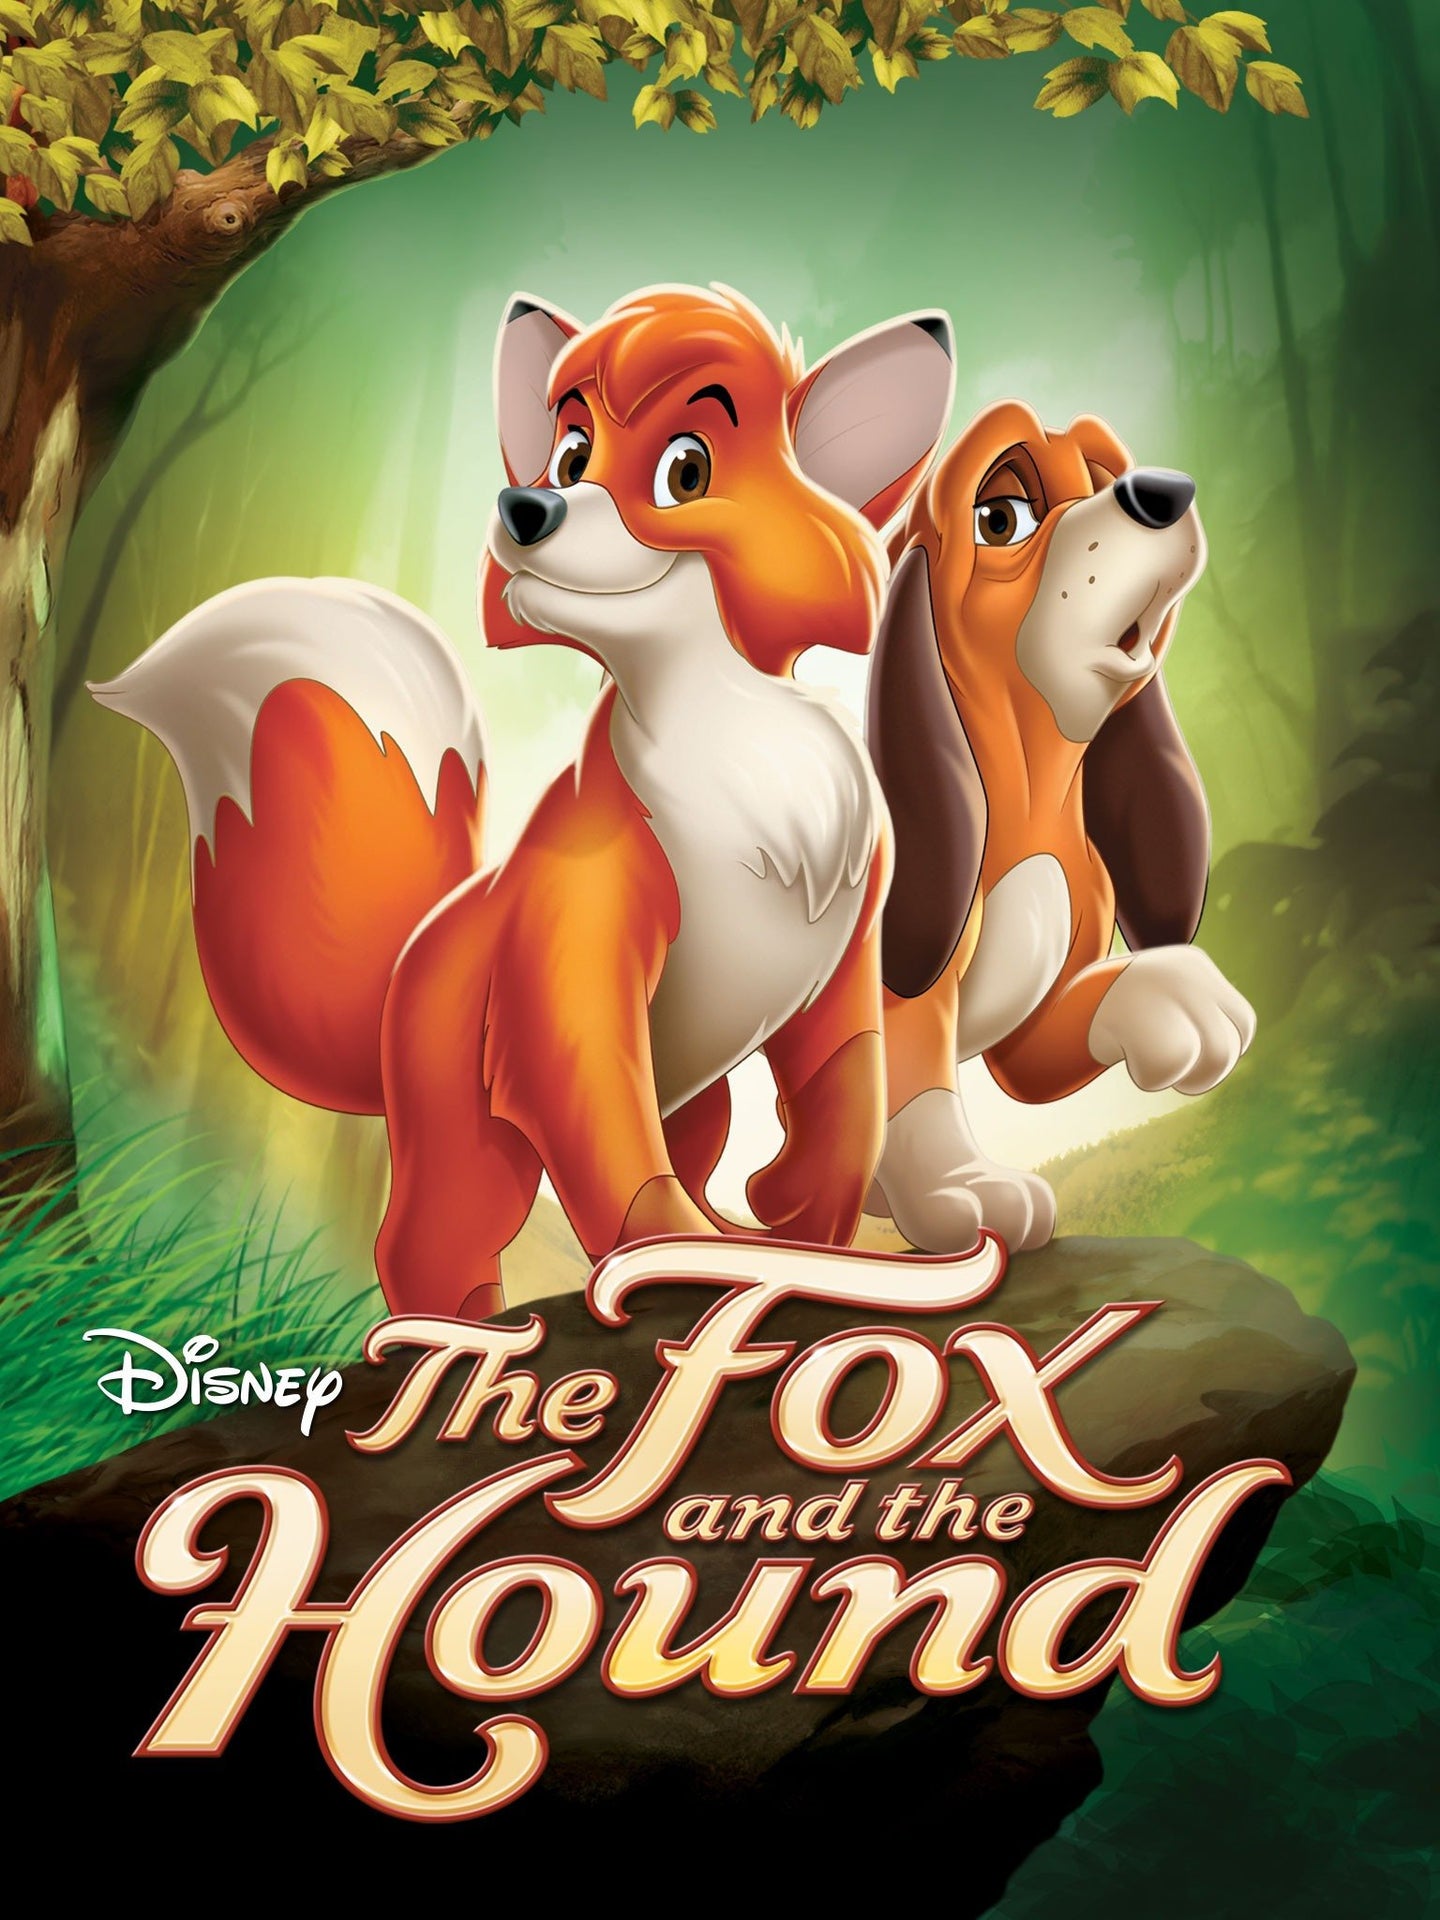 The Fox and the Hound (1981) Vudu or Movies Anywhere HD redemption only